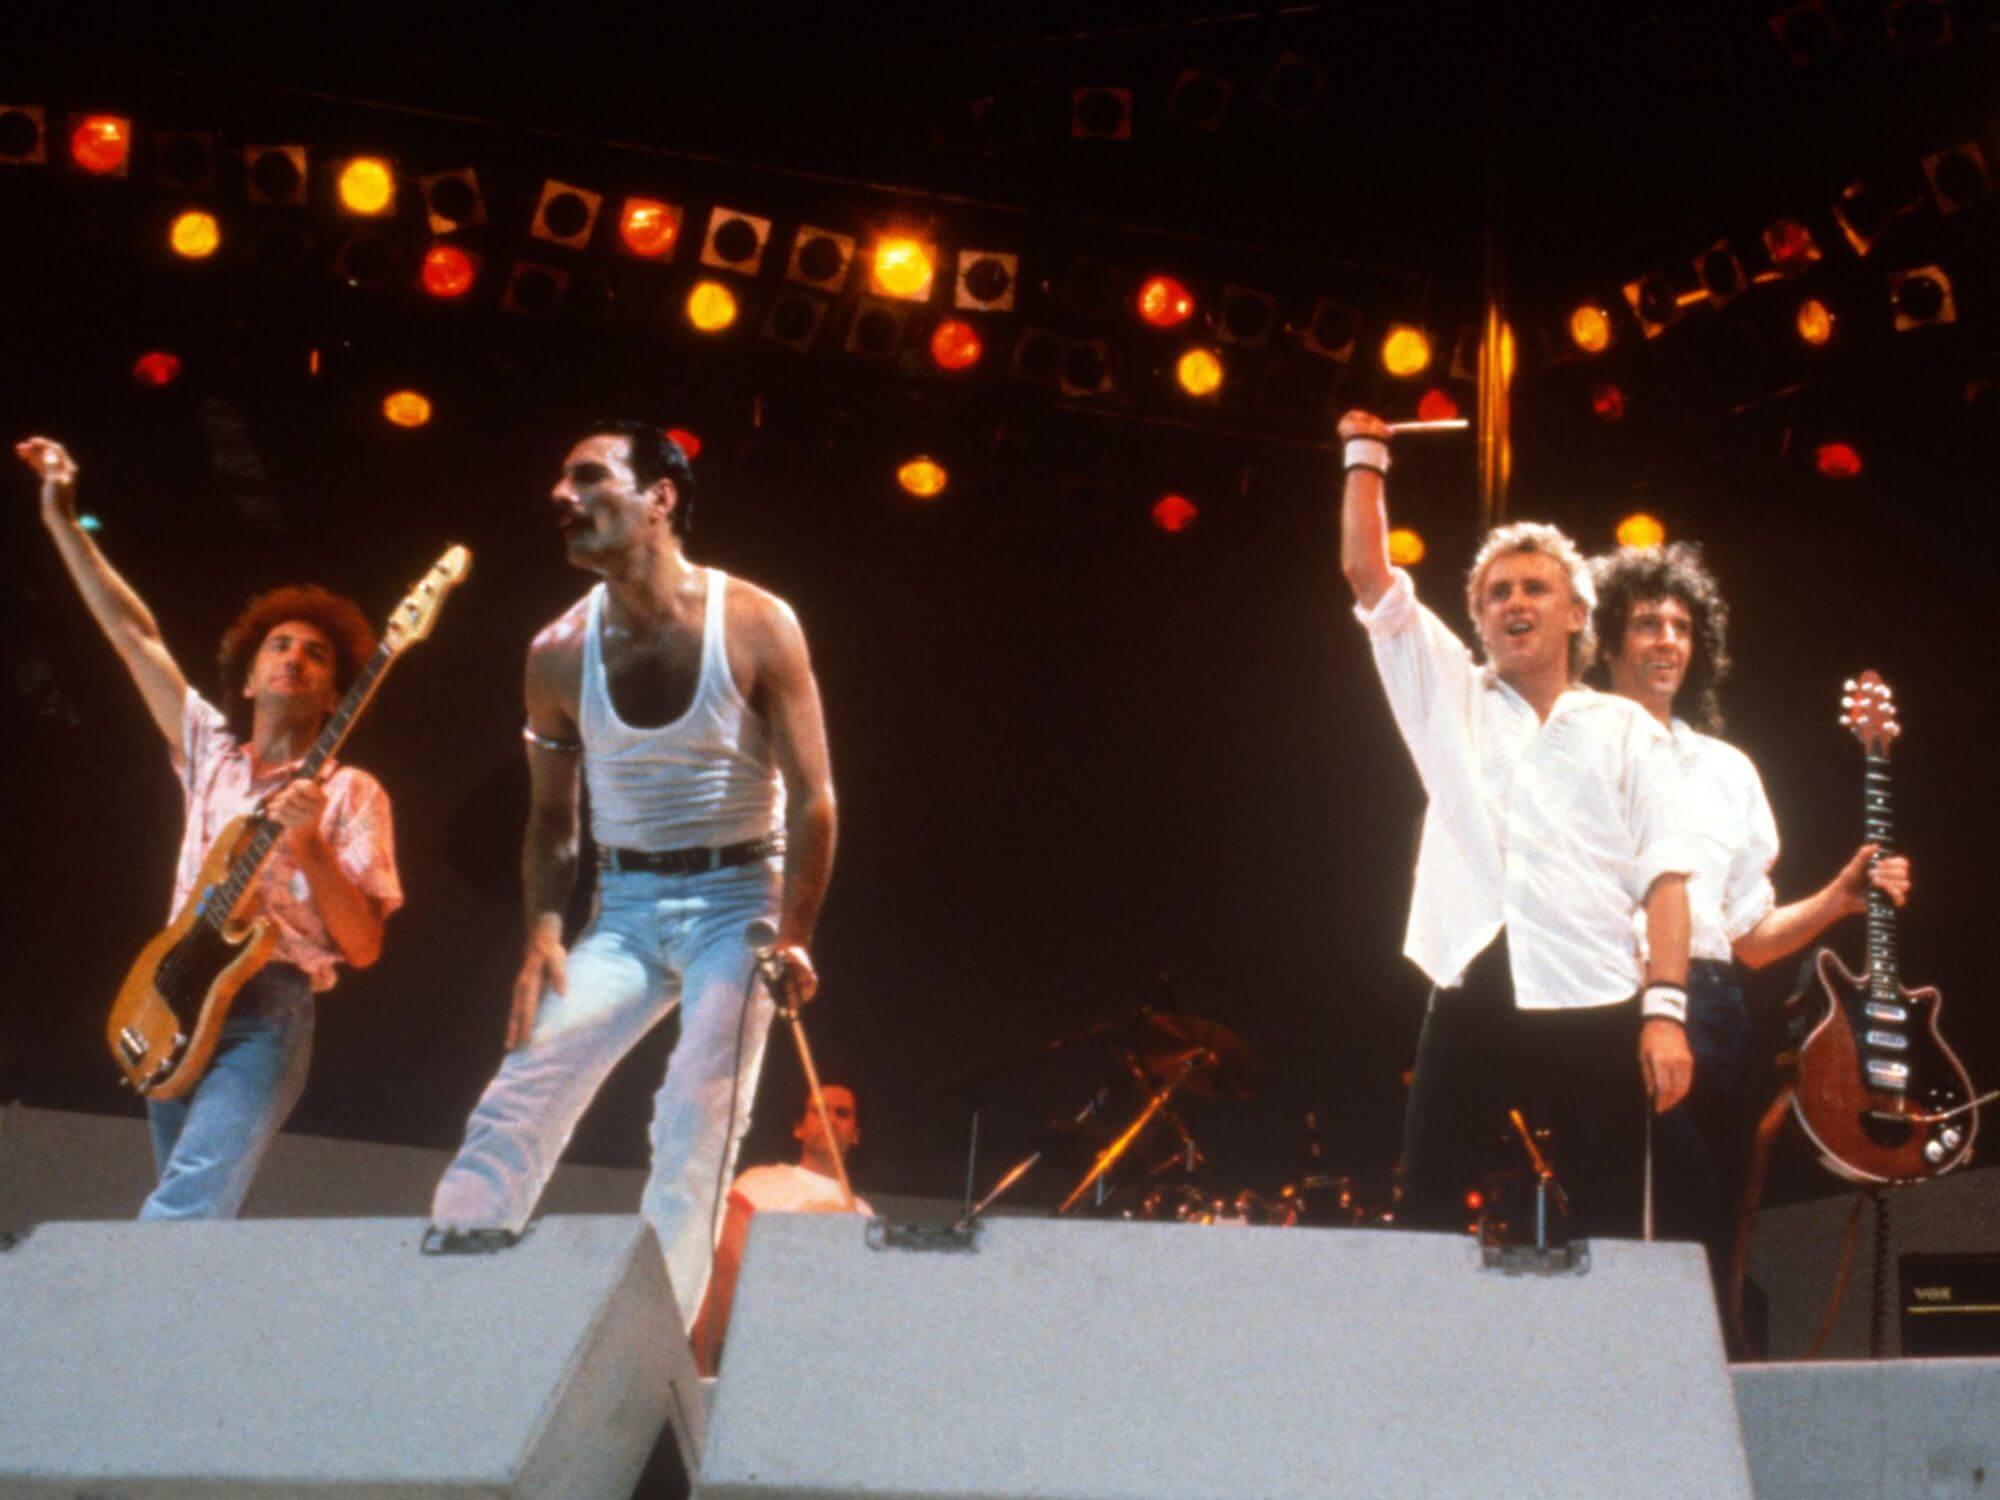 Queen performing at the Live Aid charity concert in 1985